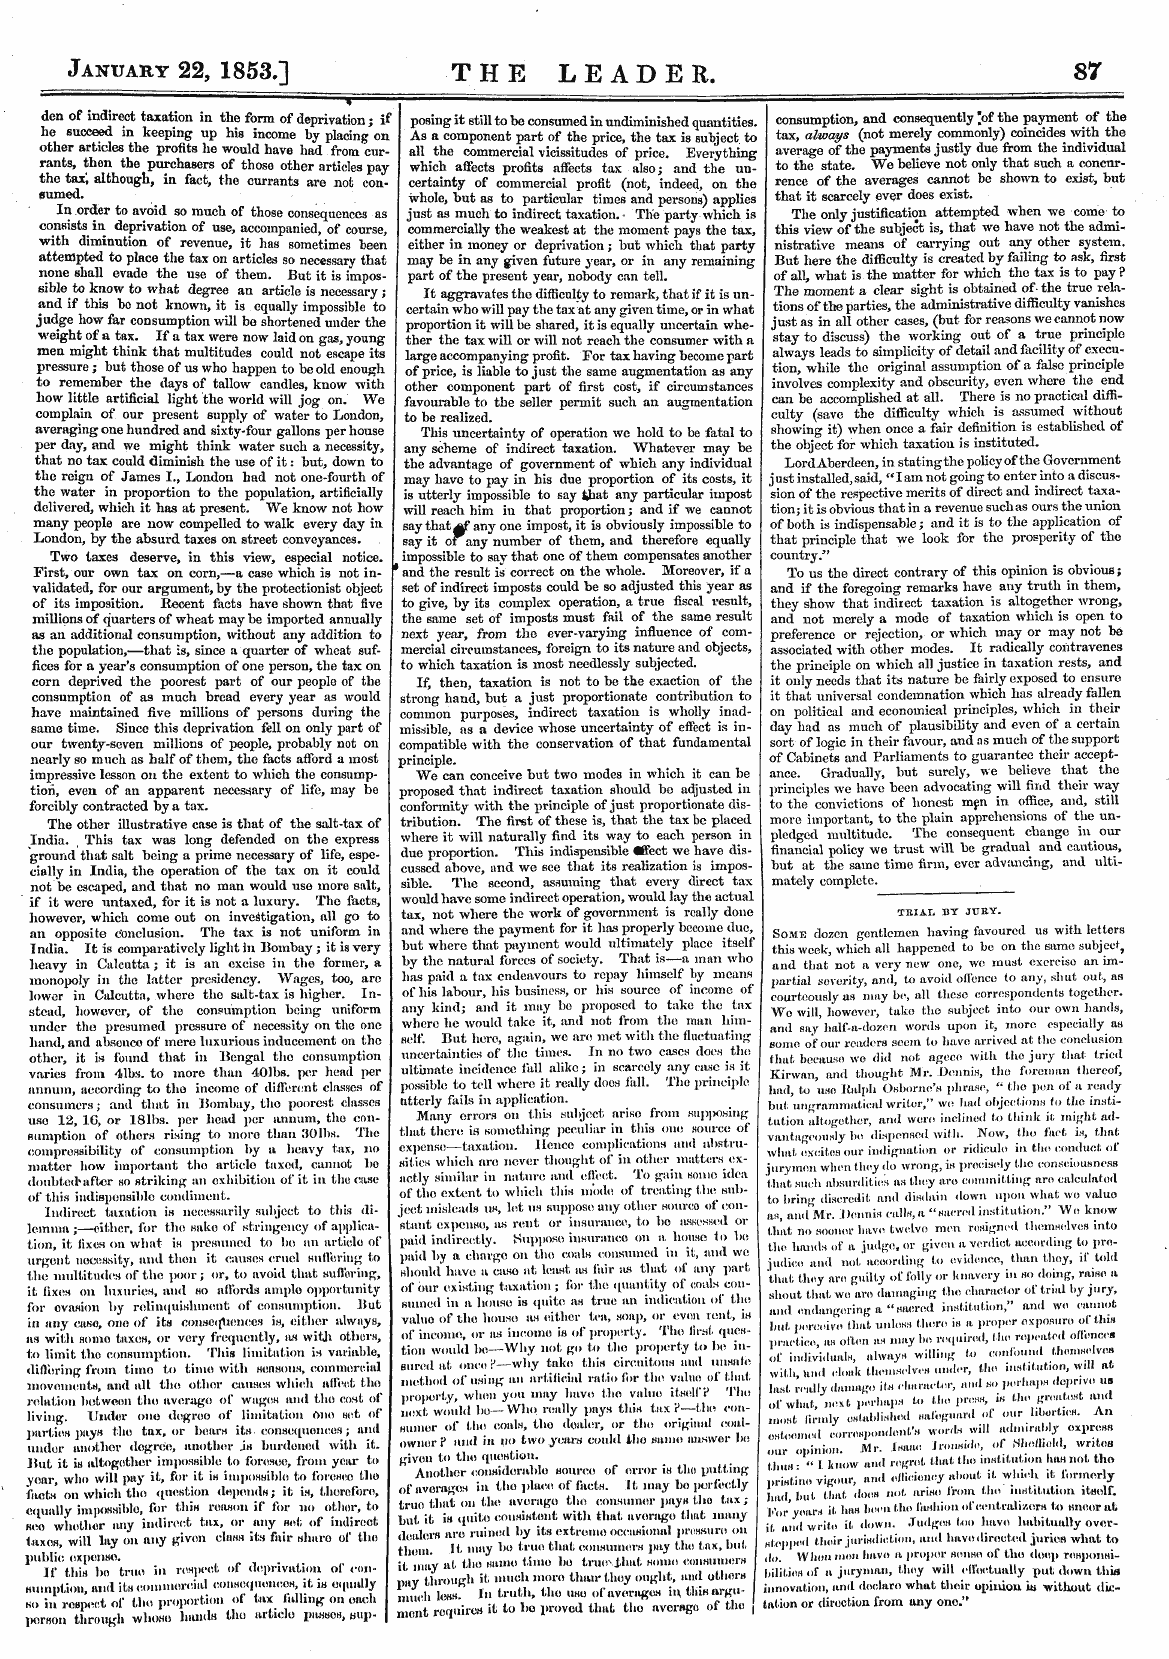 Leader (1850-1860): jS F Y, Country edition - January 22, 1853,] The Leader. 87